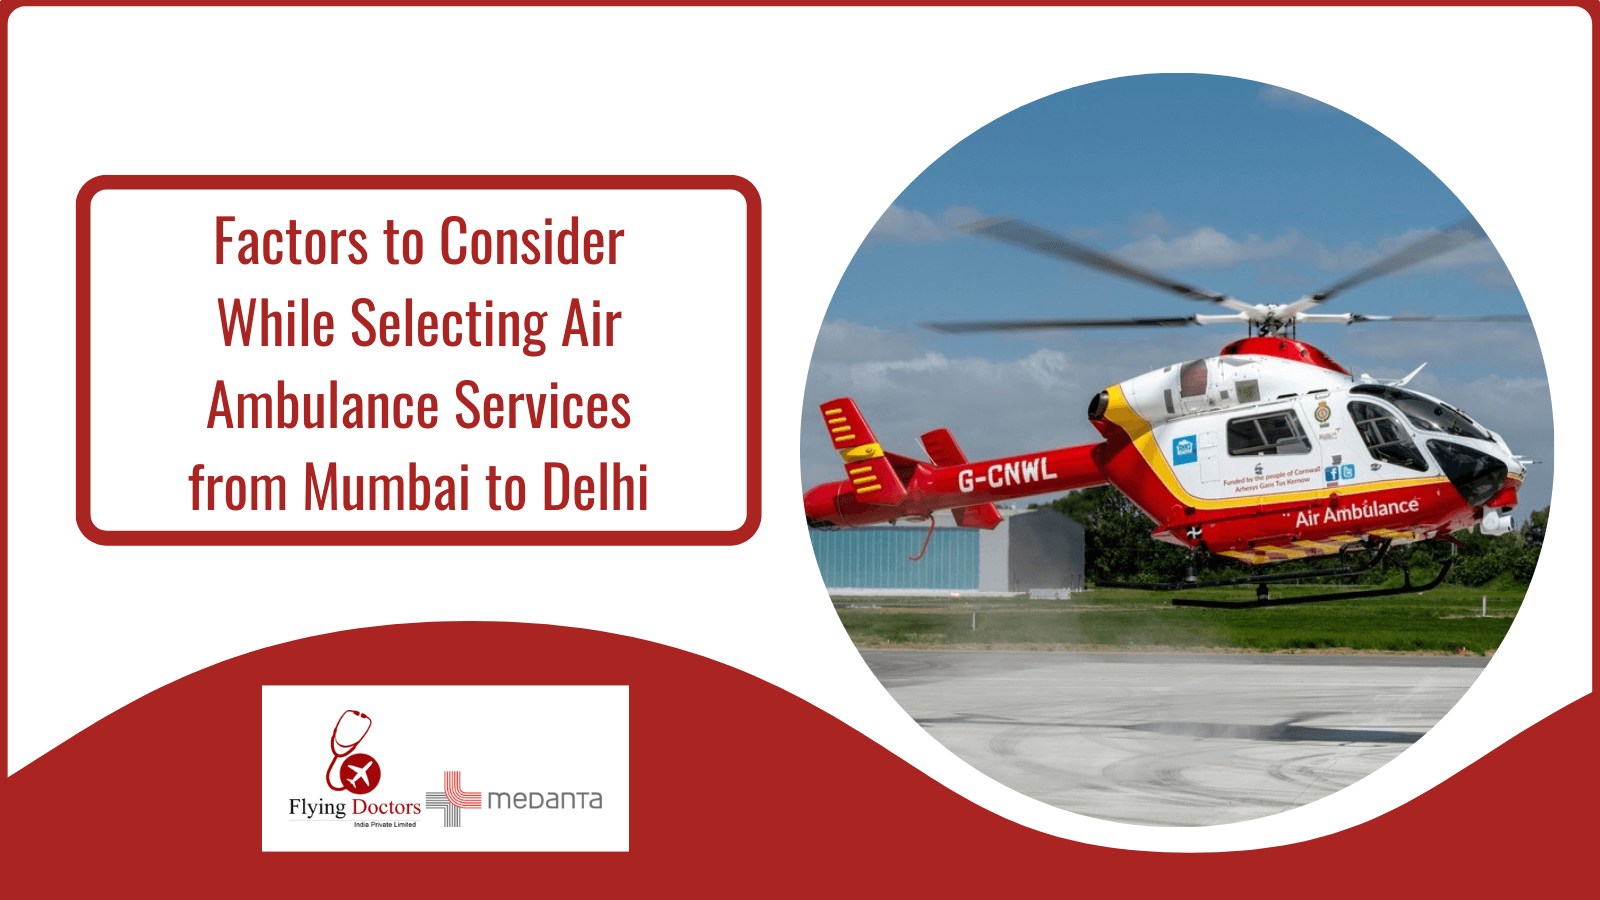 Factors to Consider While Selecting Air Ambulance Services from Mumbai to Delhi